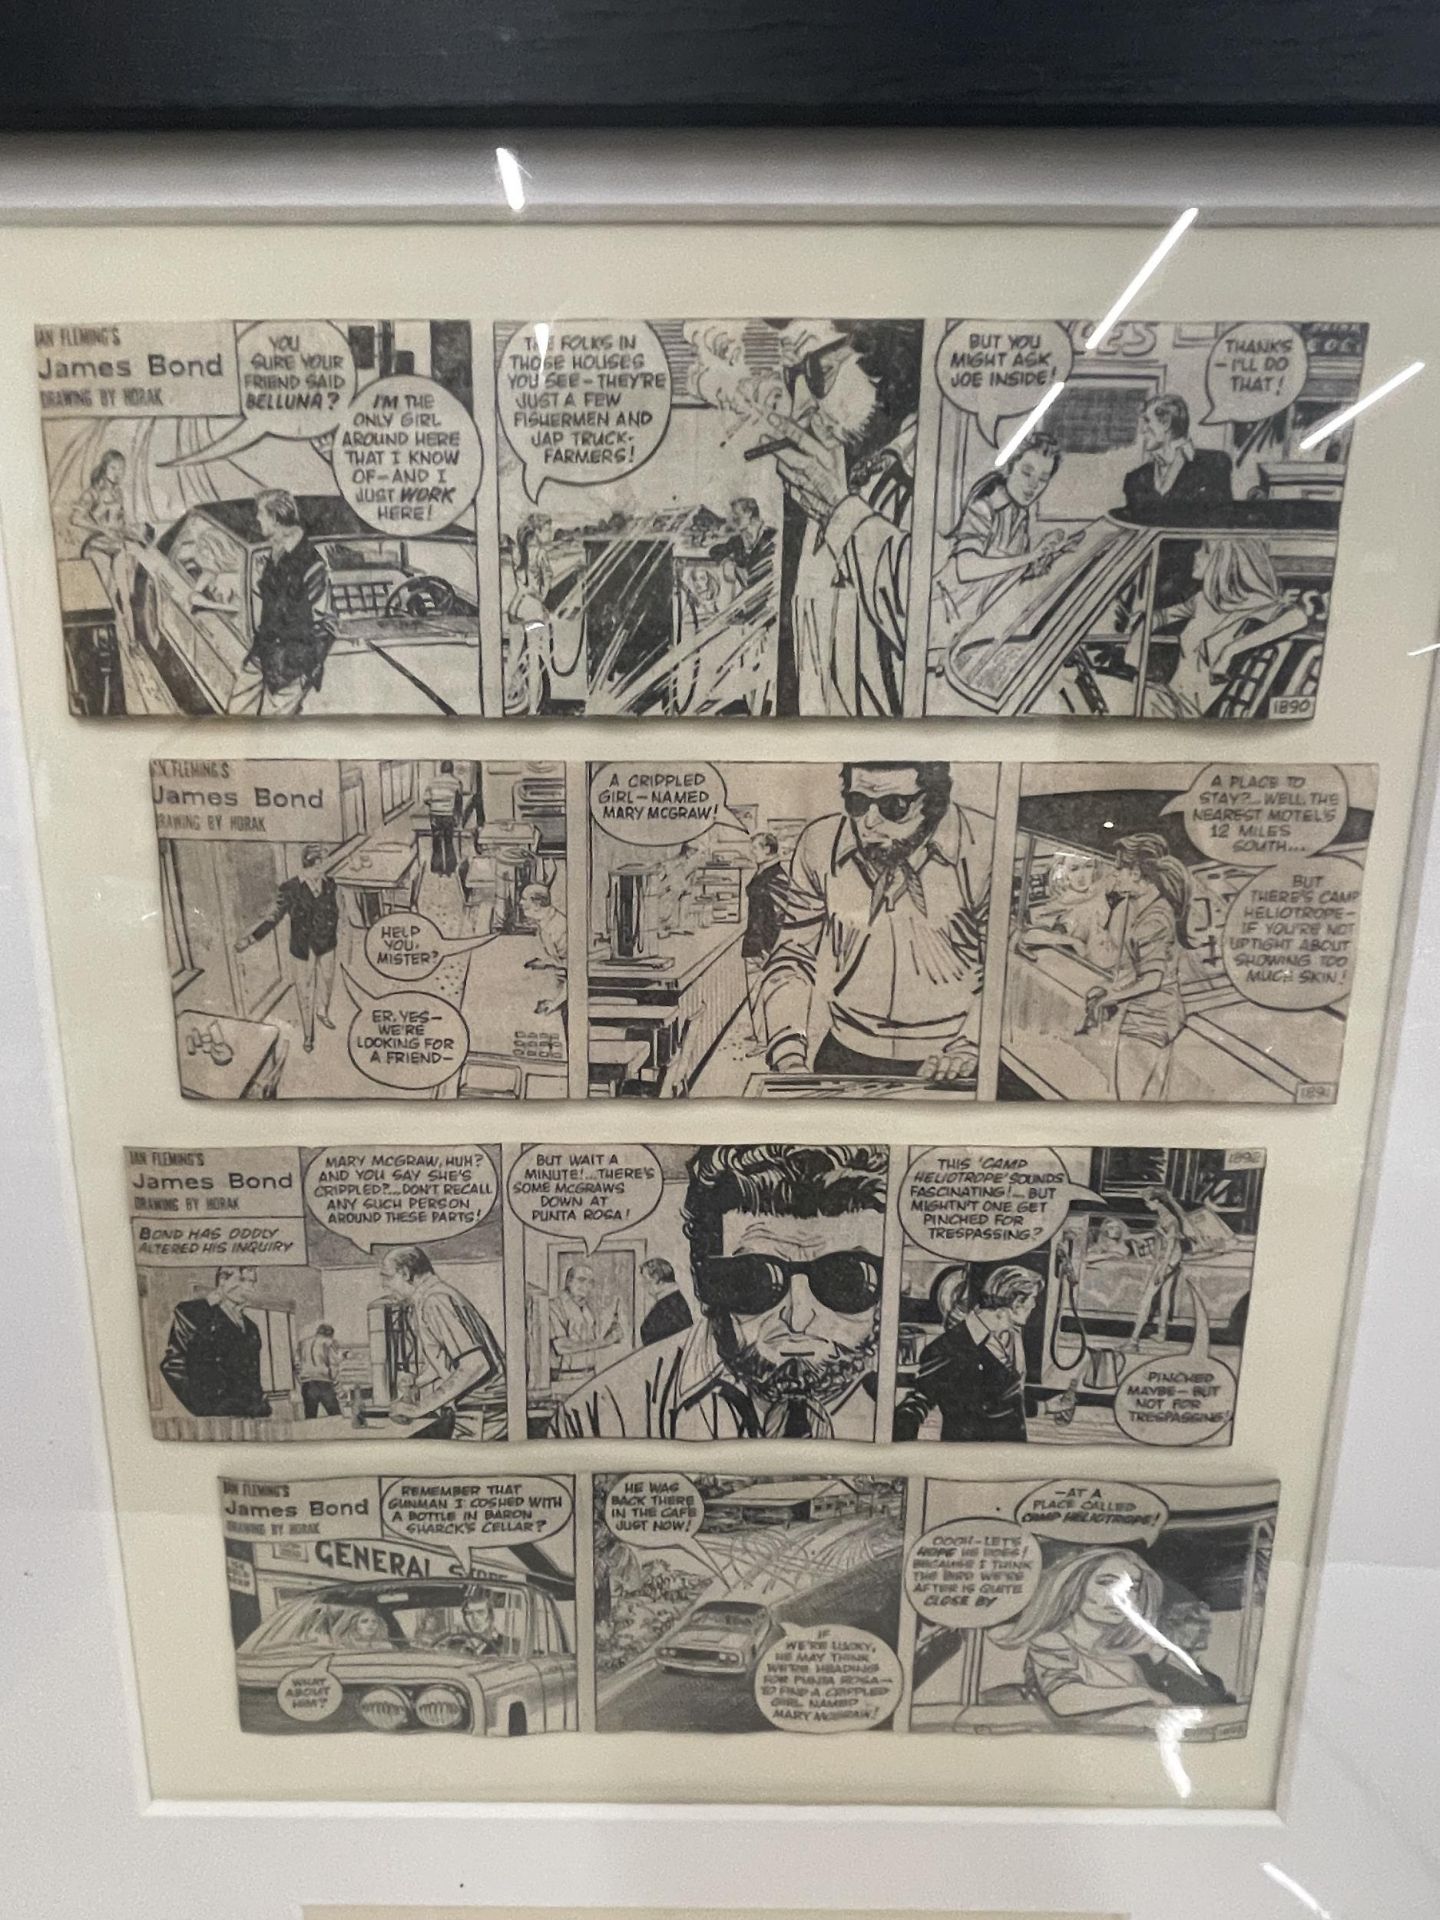 A FRAMED JAMES BOND IAN FLEMING COMIC BOOK STRIP WITH LOWER PENCIL SIGNED DRAWING OF A LADY, - Bild 2 aus 3